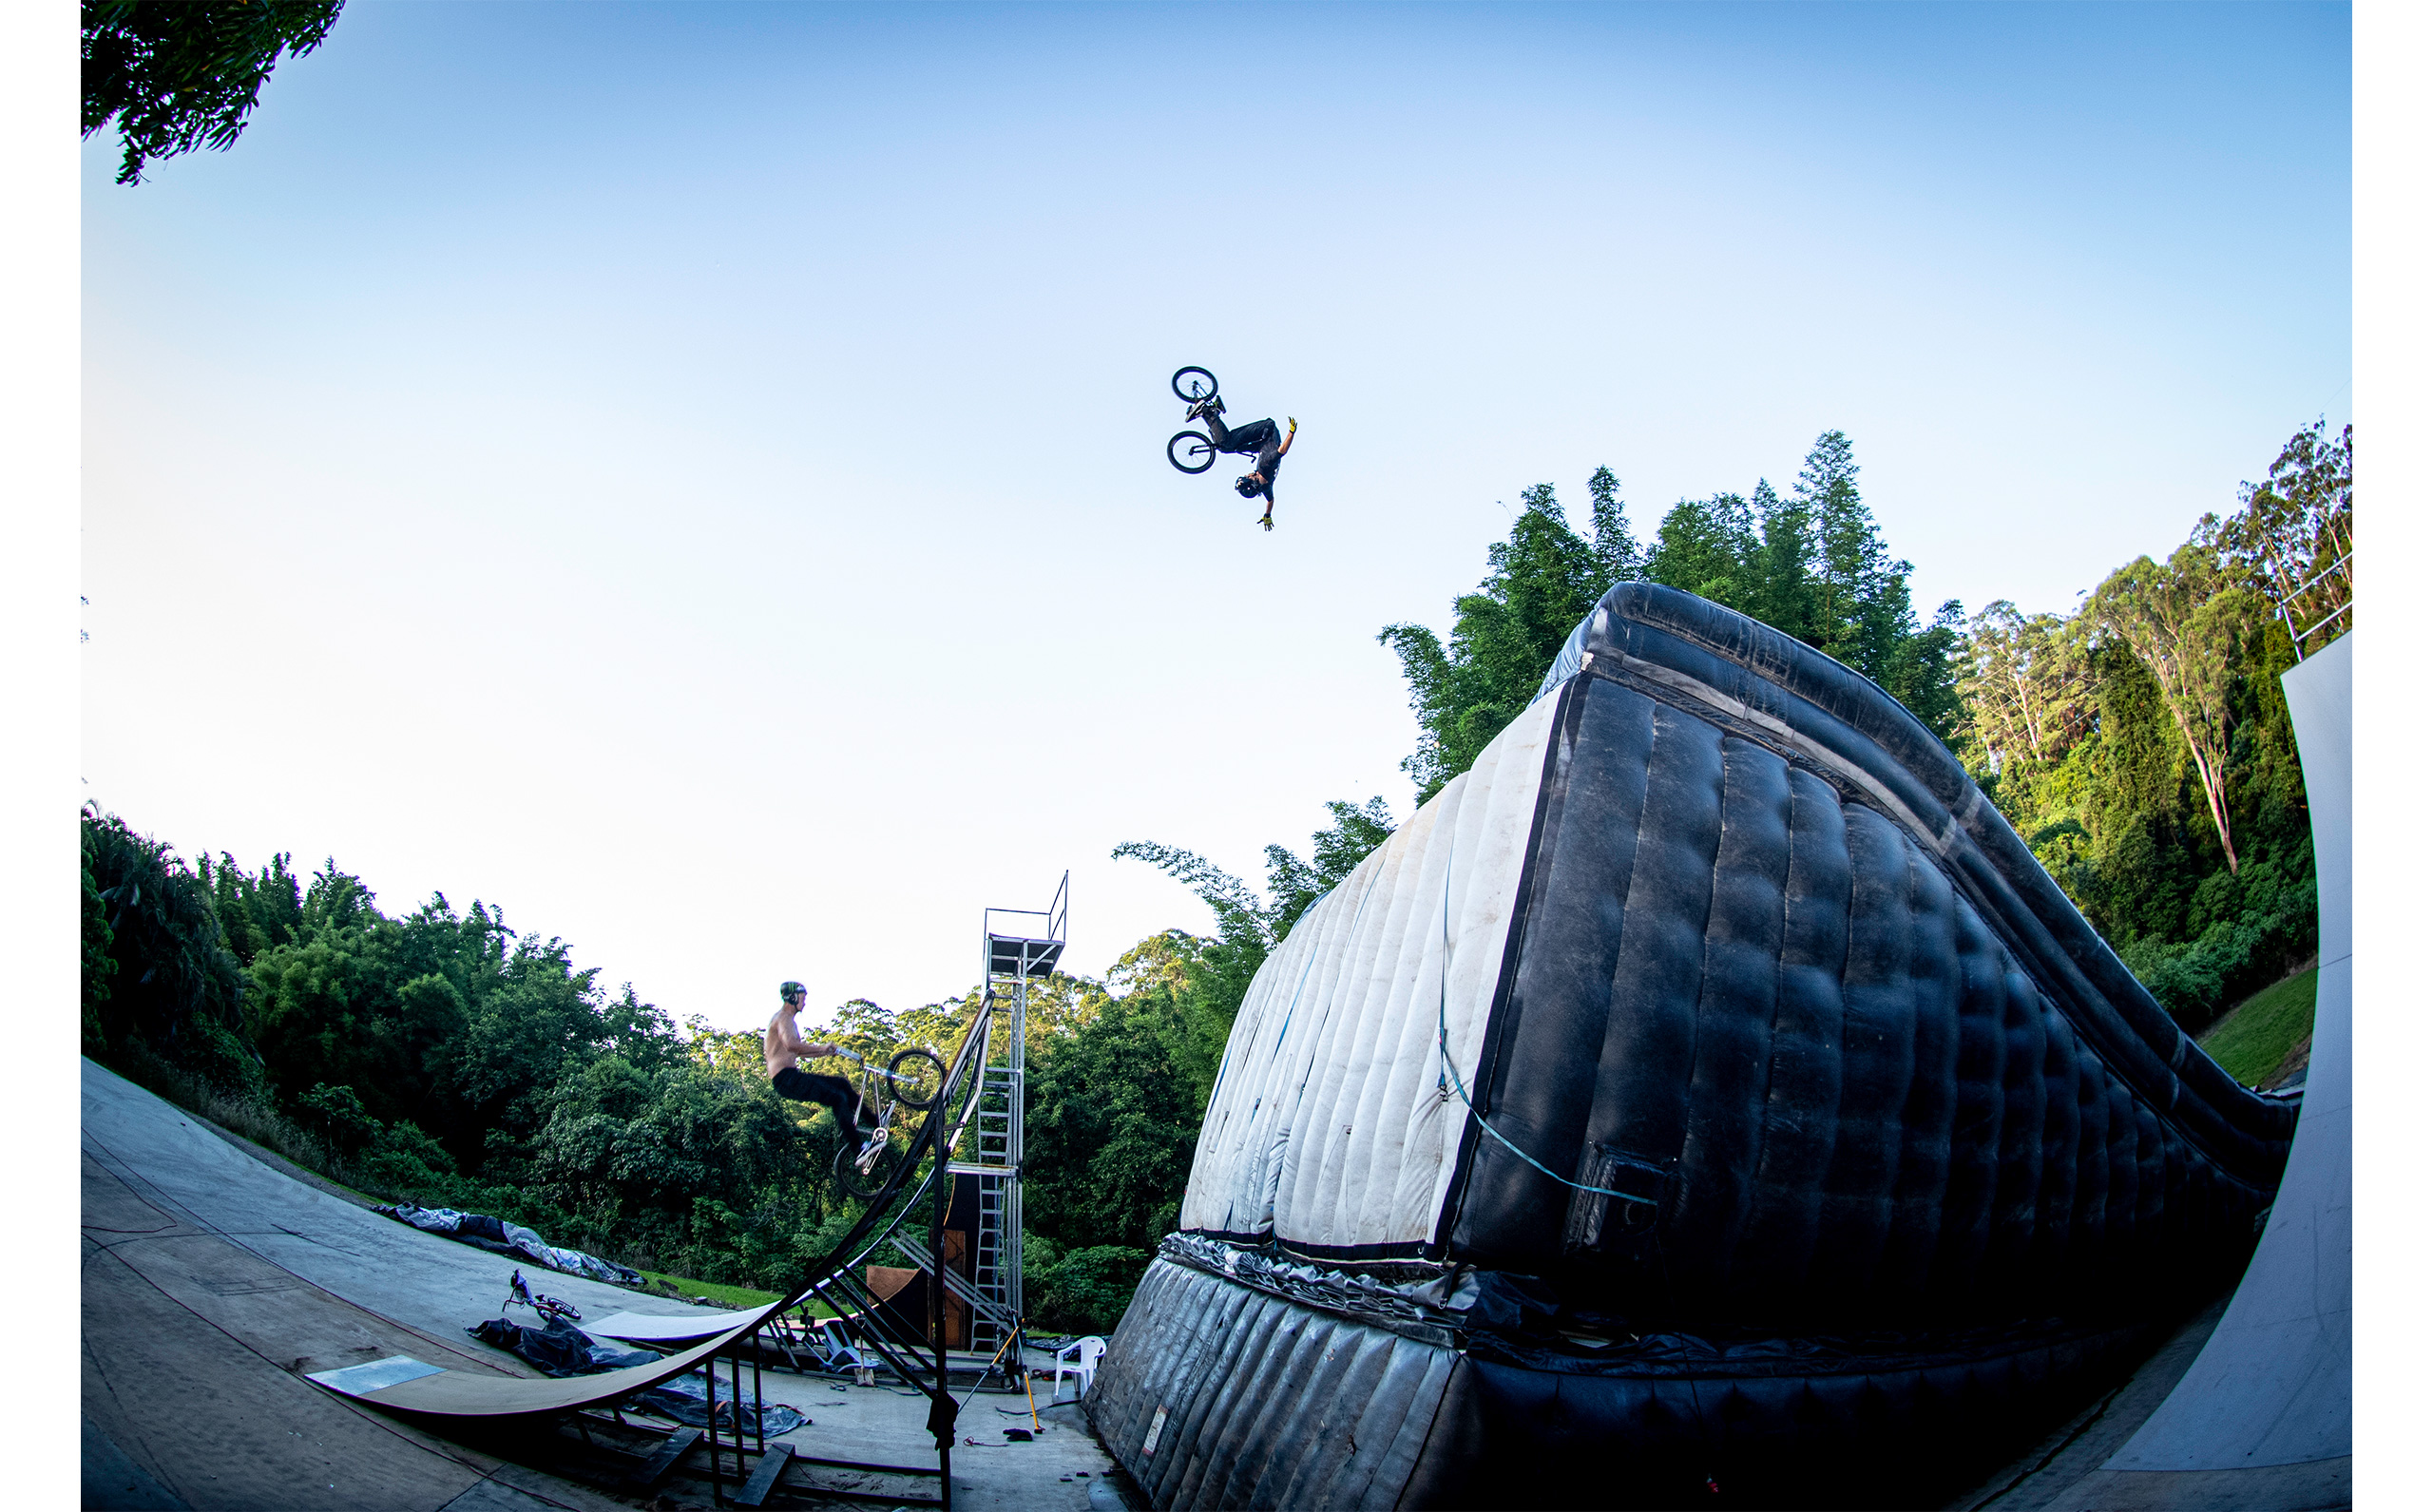 Dylan Devitt does  front flip tuck no hander on the bag jump at Ryan Williams compound.